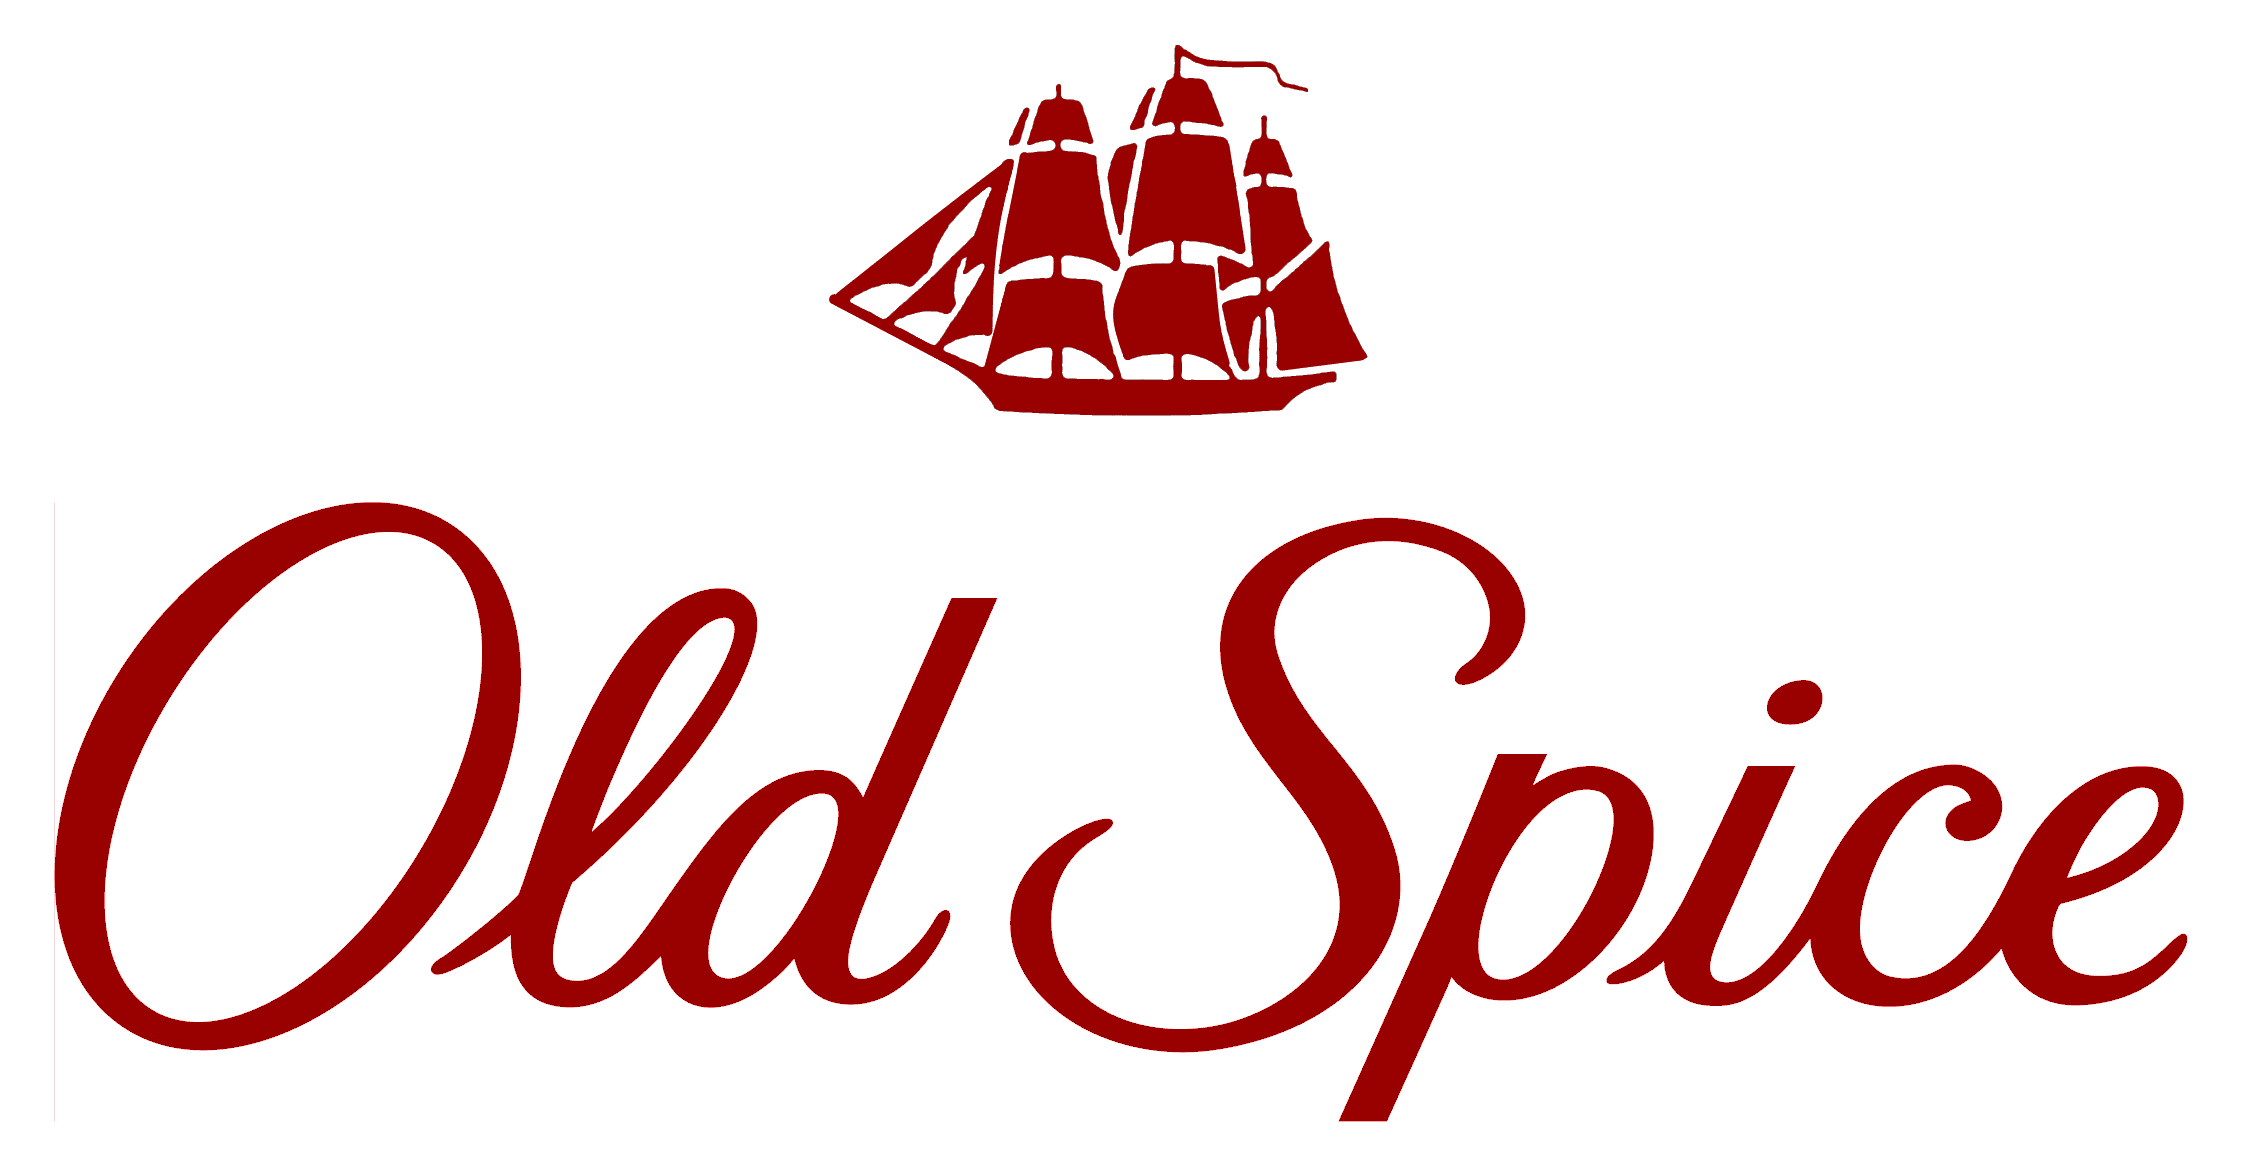 Old Spice Products